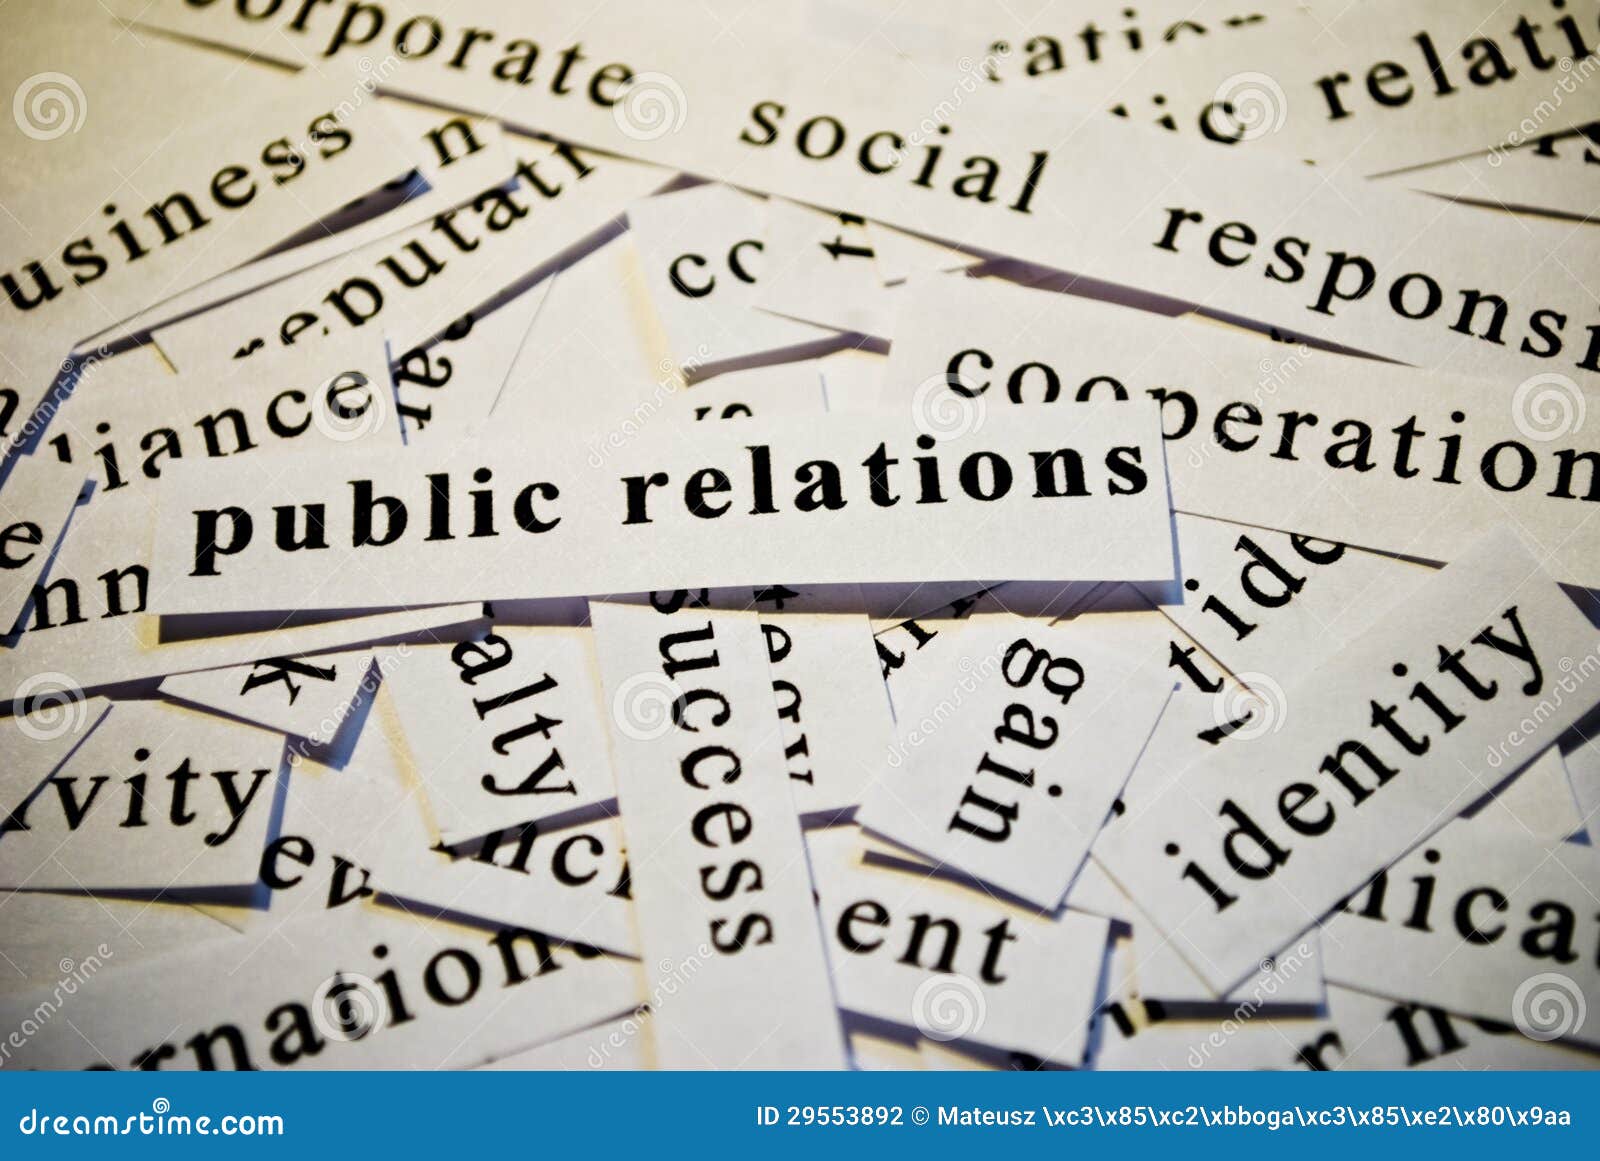 public relations, pr. words related with business